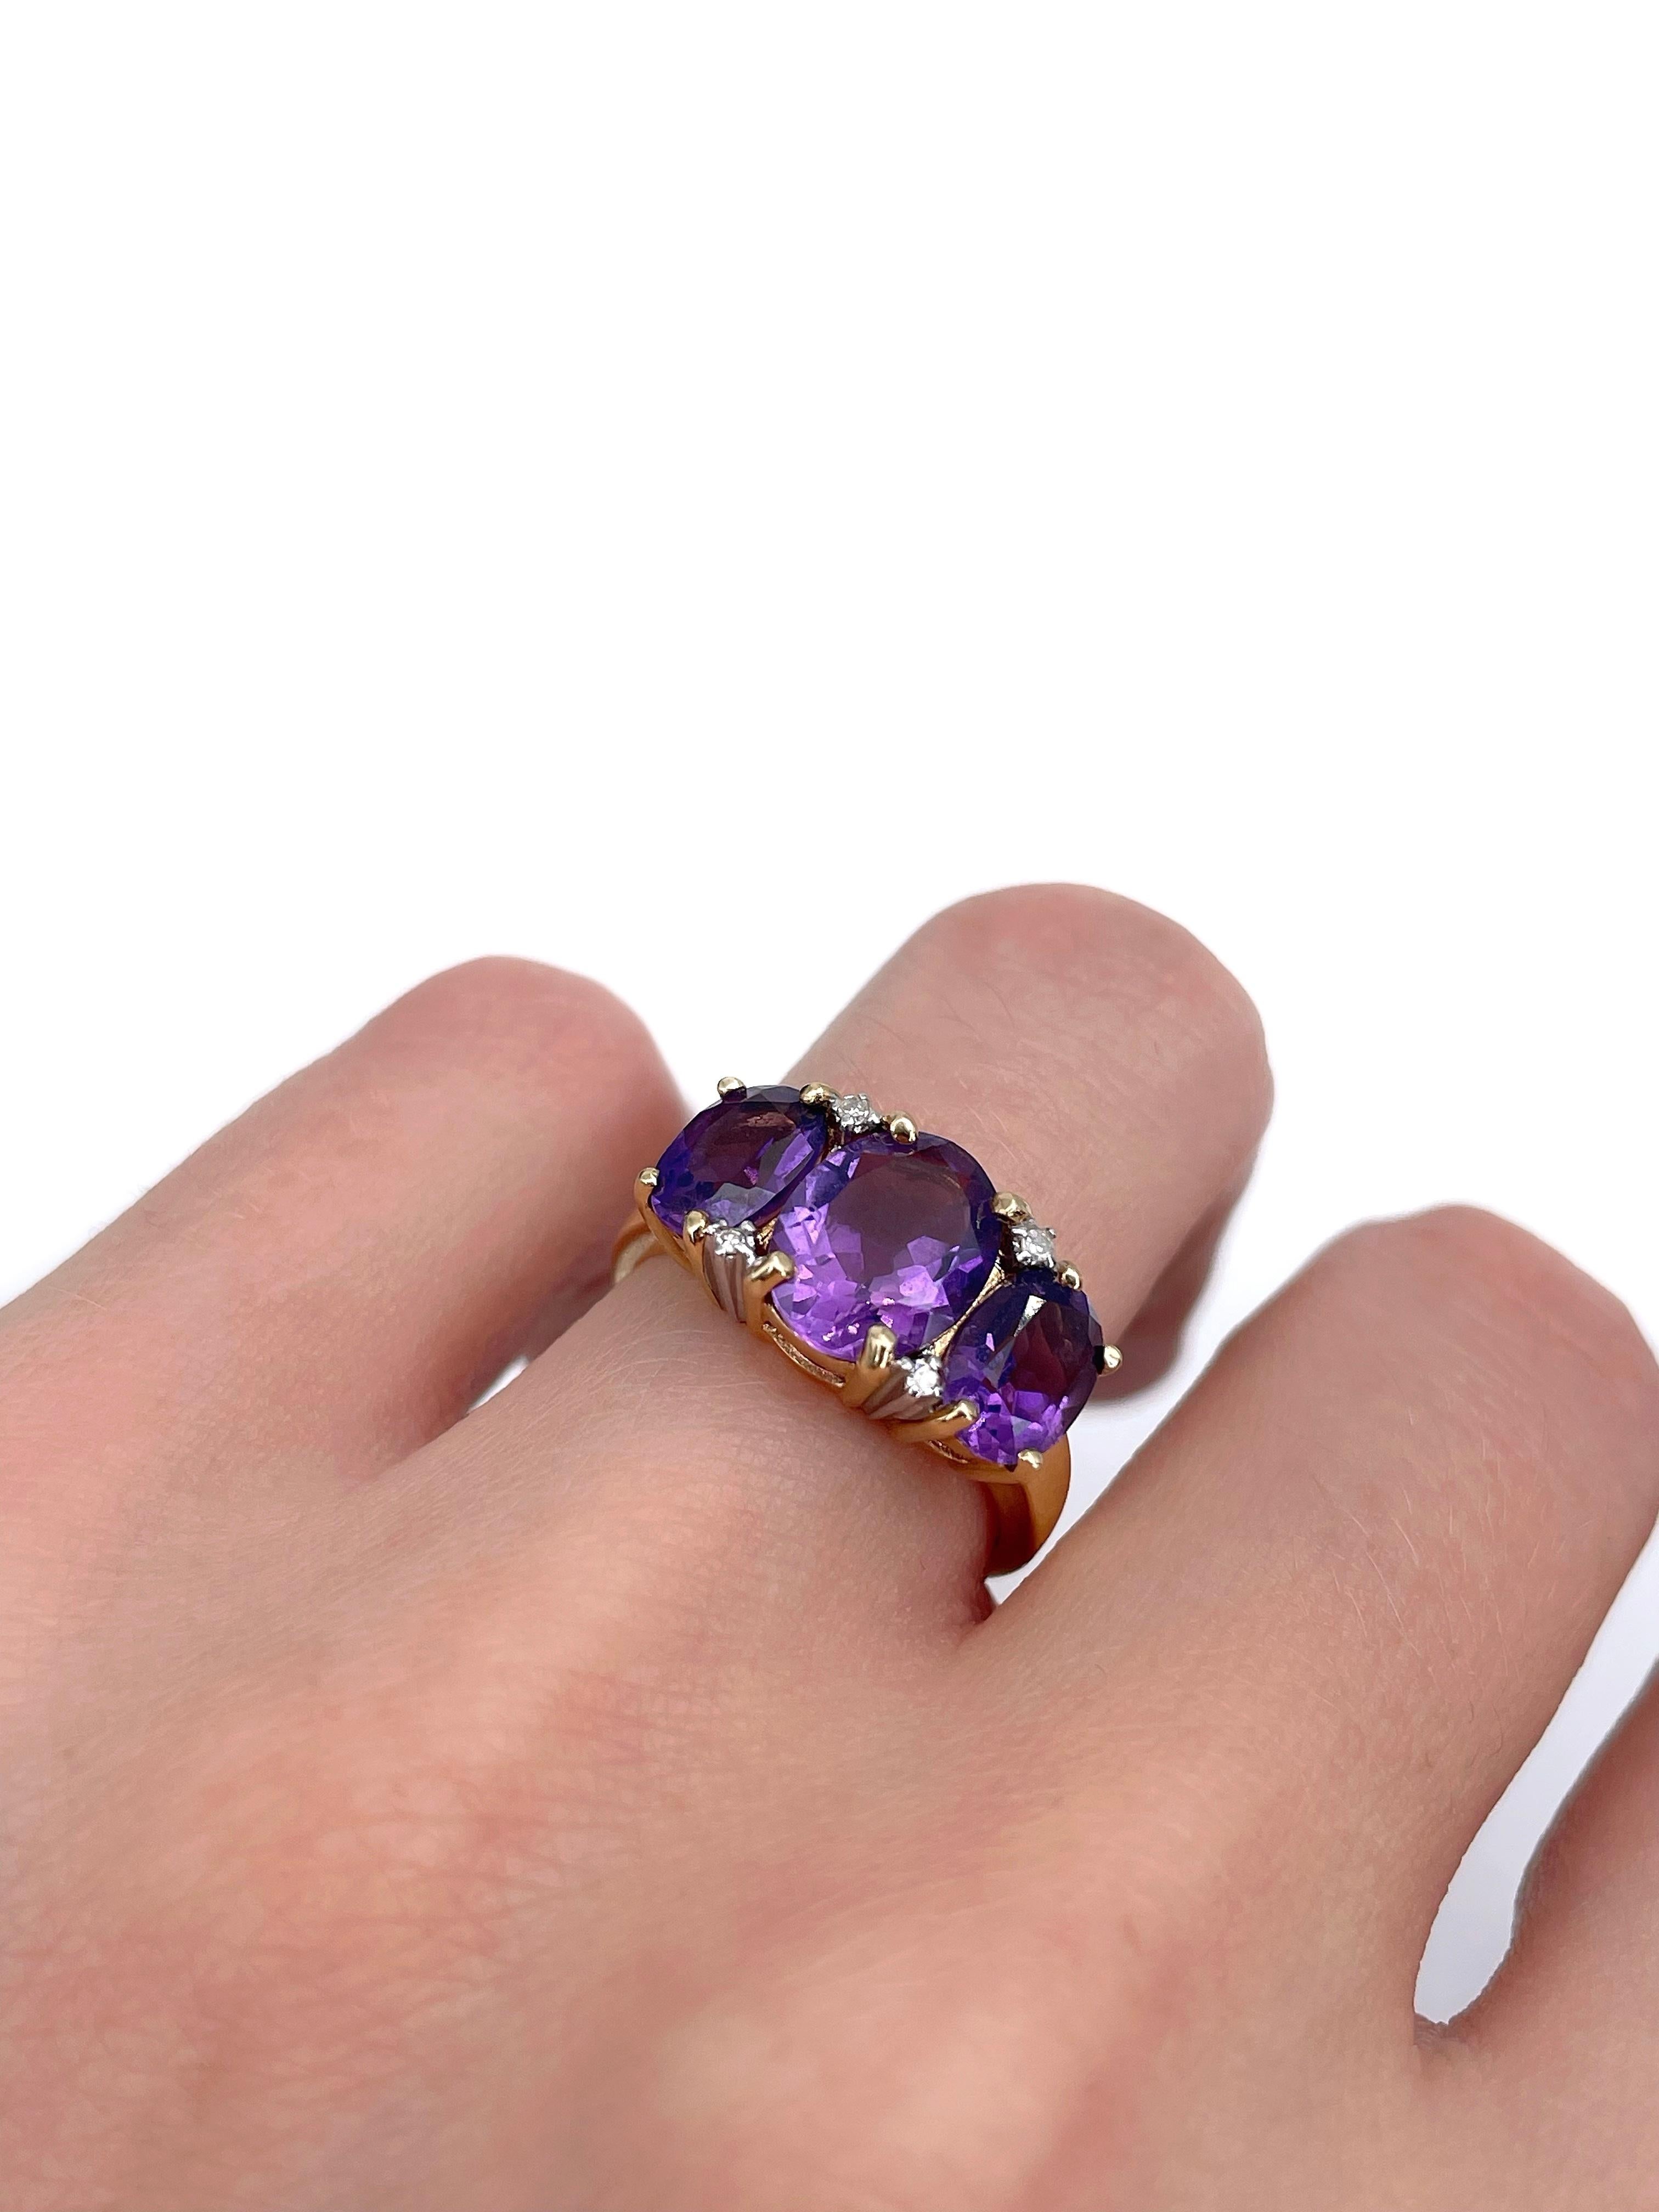 This is a lovely three-stone ring crafted in 18K yellow gold. Circa 1960. 

The piece features 3 oval cut amazing colour amethysts. The gems are accompanied with 4 tiny diamonds. 

Weight: 3.61g
Size: 16.5 (US 6)

IMPORTANT: please ask about the